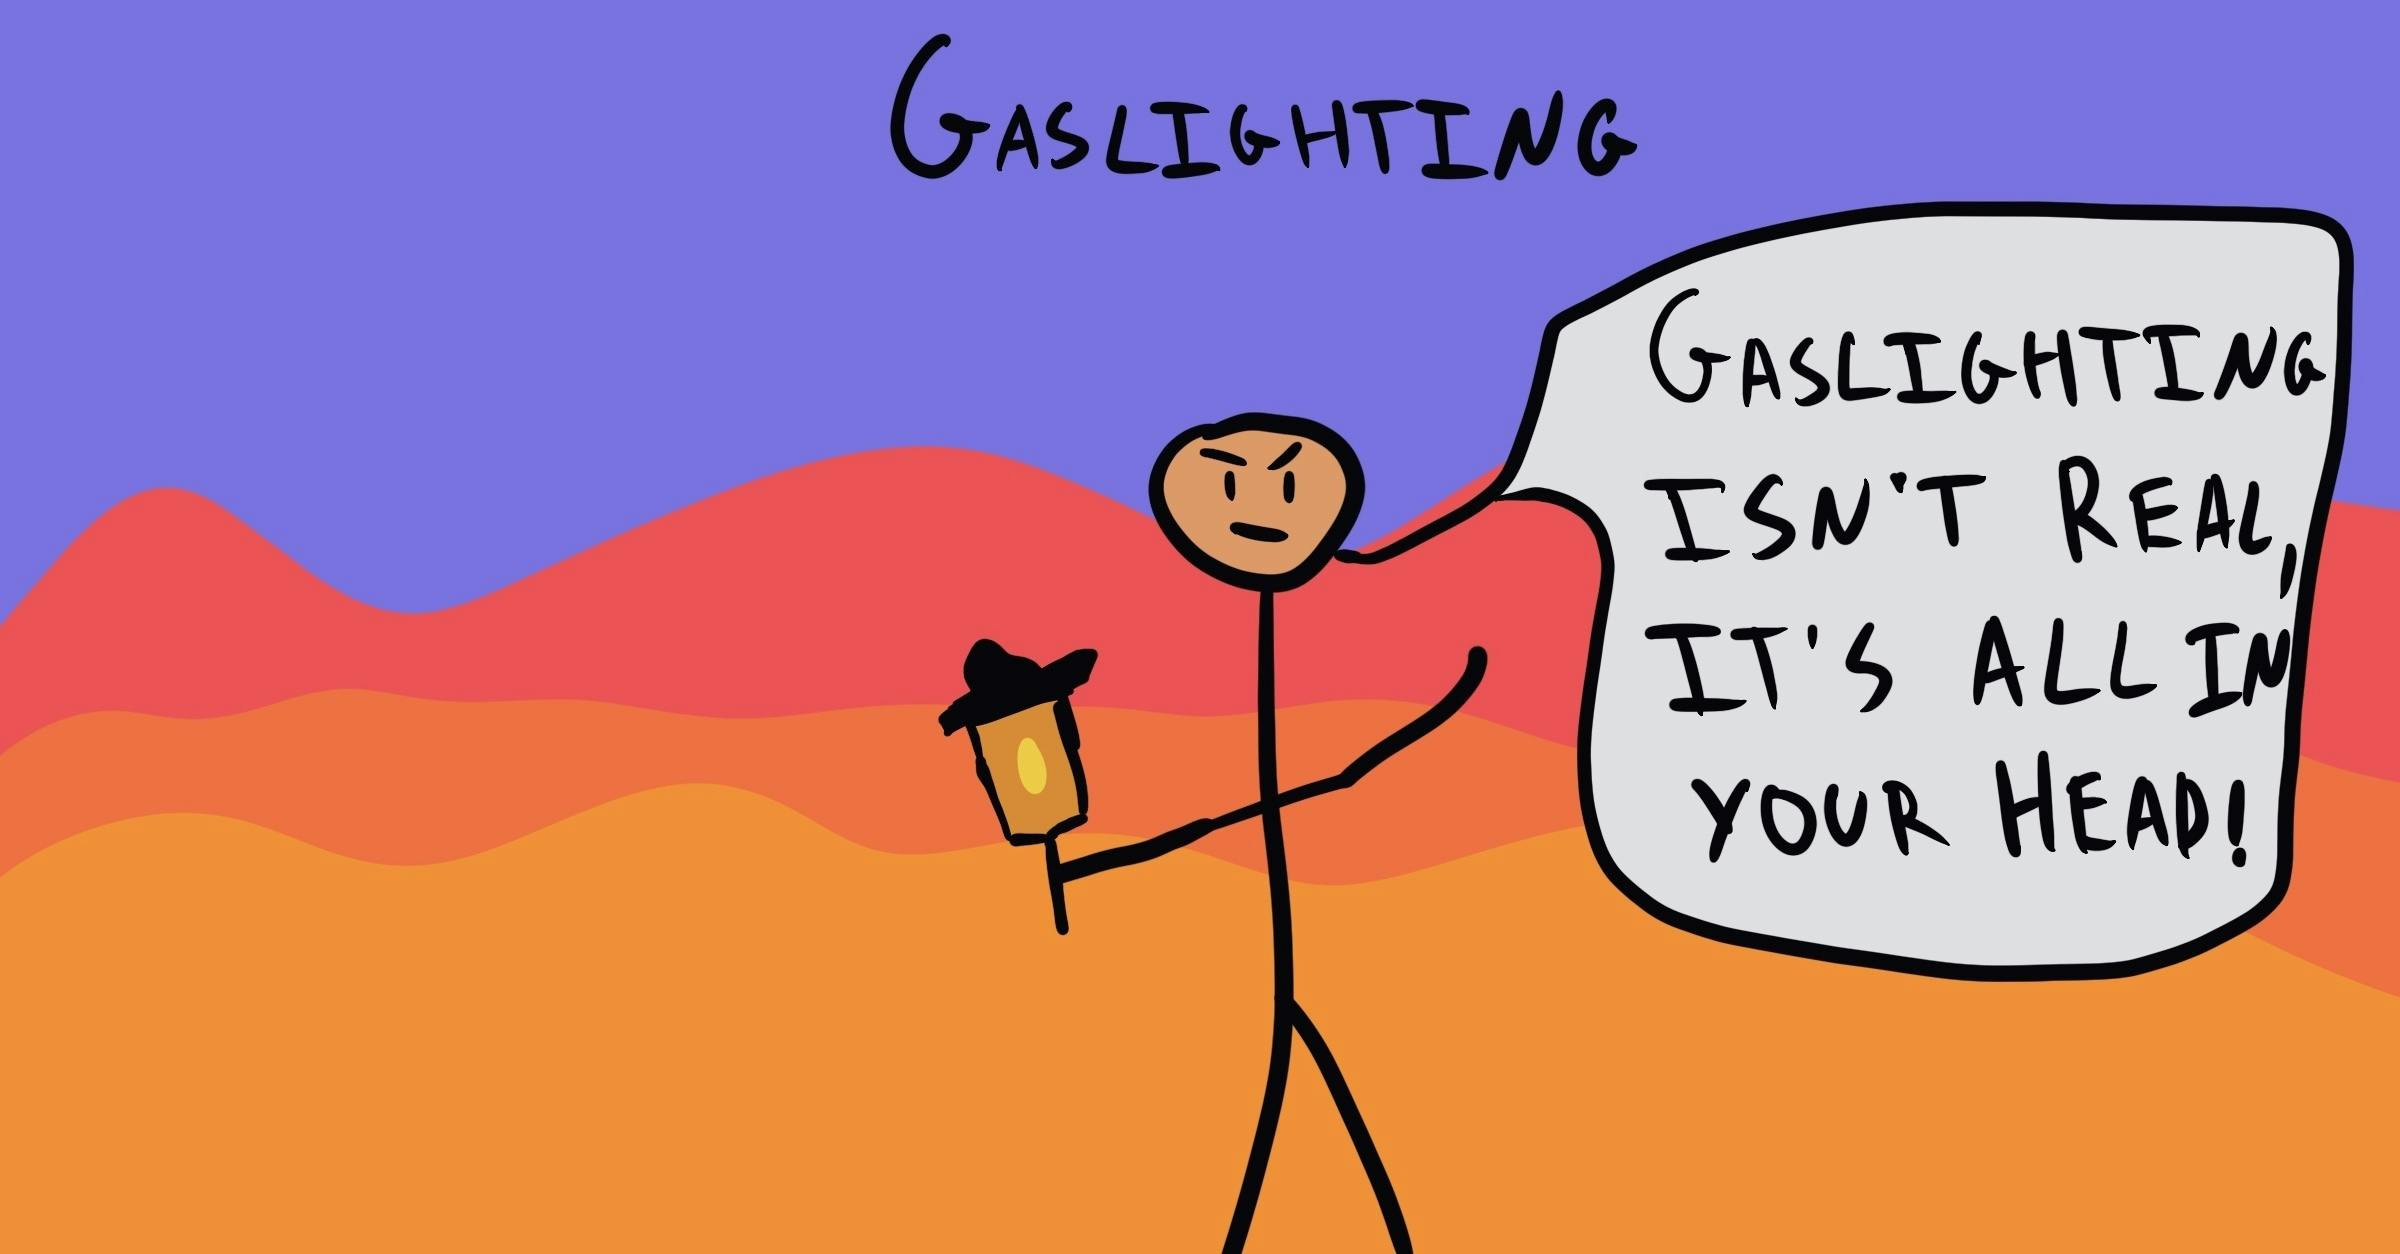 Illustration of a man holding a lamp and saying "Gaslighting isn't real, it's all in your head!"